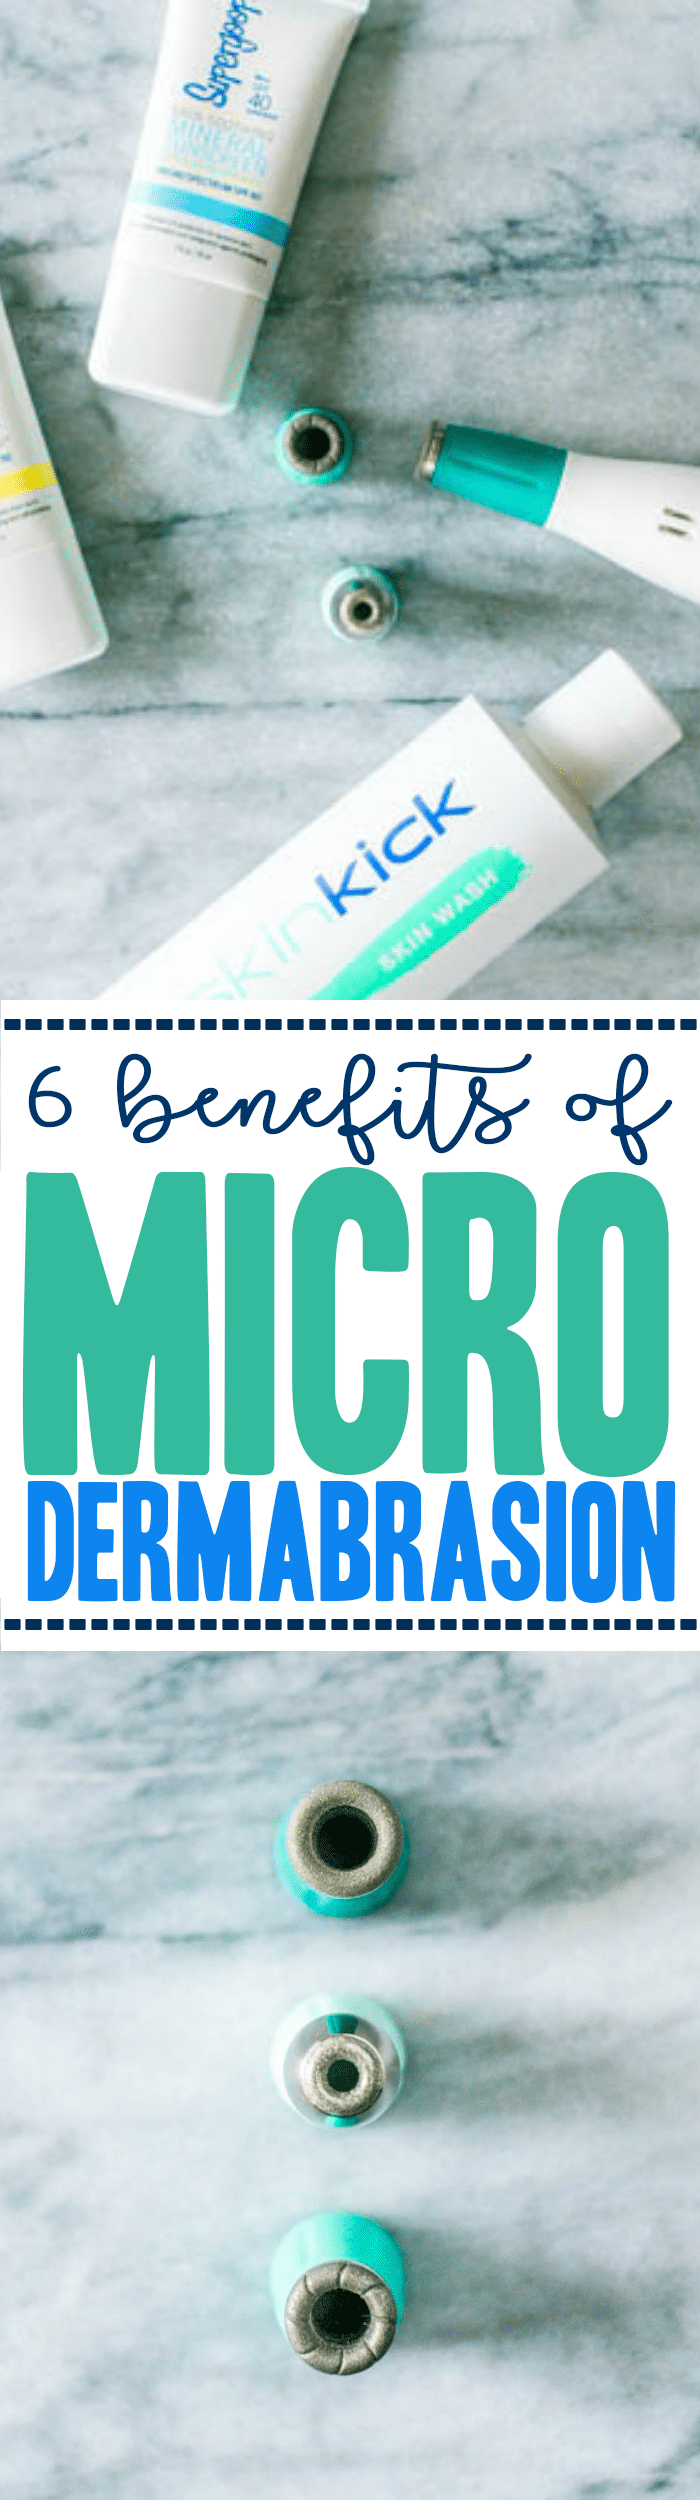 6-benefits-of-Microdermabrasion